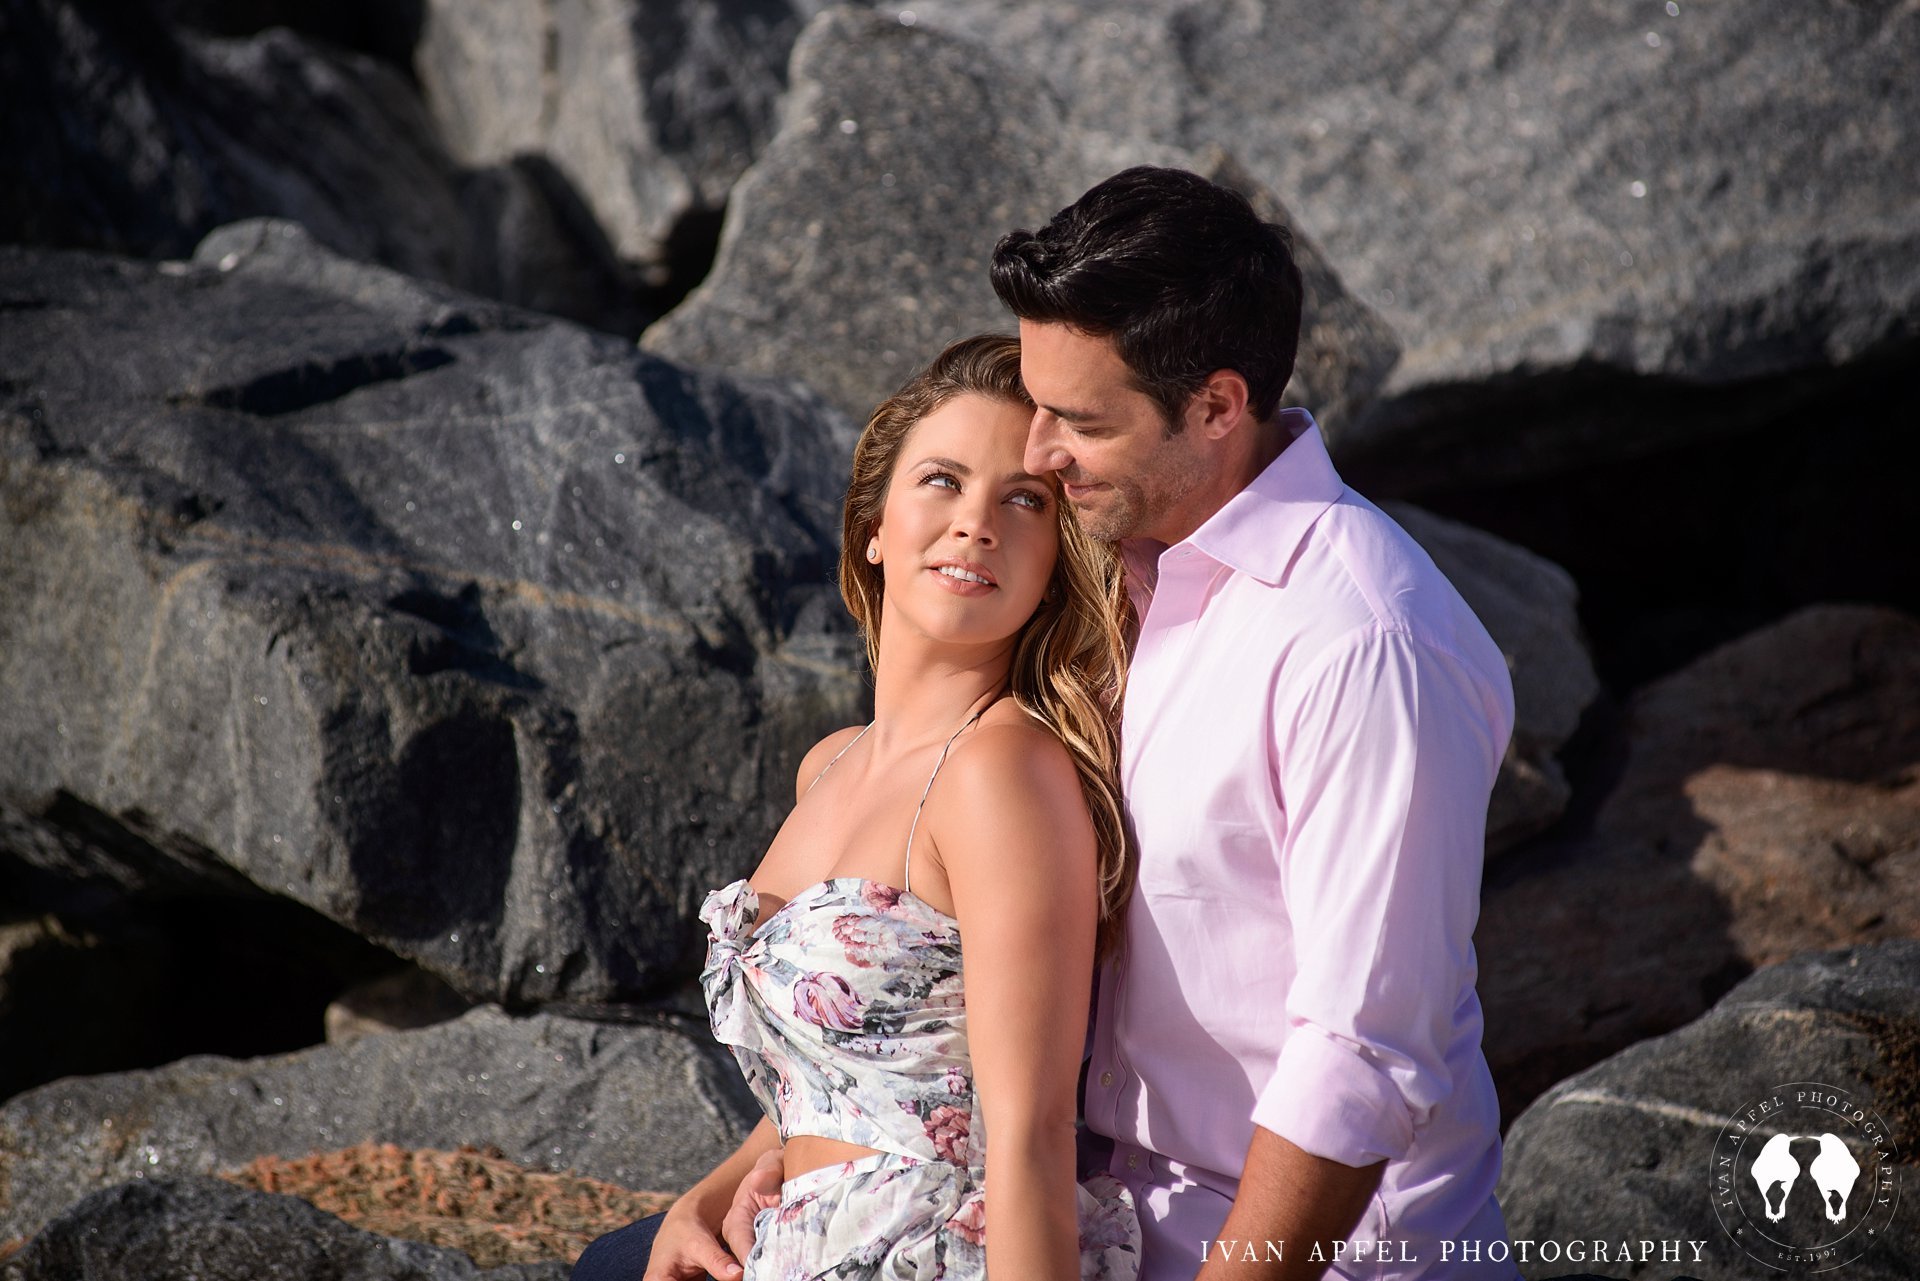 ximena duque and jay adkins engagement session ivan apfel photography miami_0010.jpg